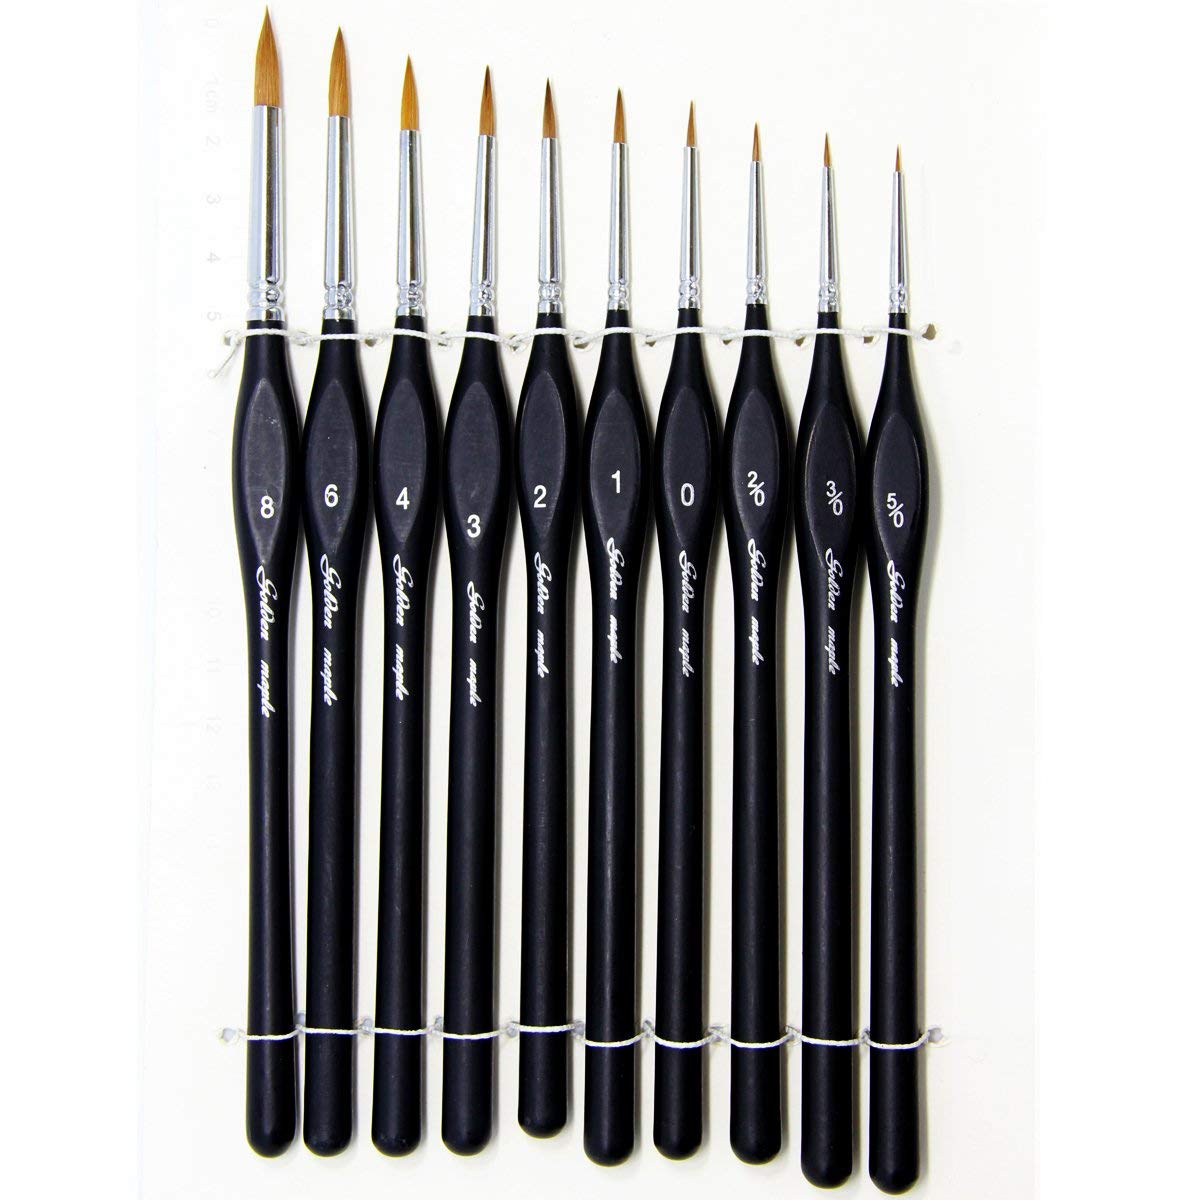  Detail Paint Brush Set - 10PCS Miniature Painting Brushes,  Micro Paint Brushes for Fine Detailing & Art Painting - Acrylic,  Watercolor, Oil, Model Painting, Warhammer 40k Miniature Figure by AORZOV